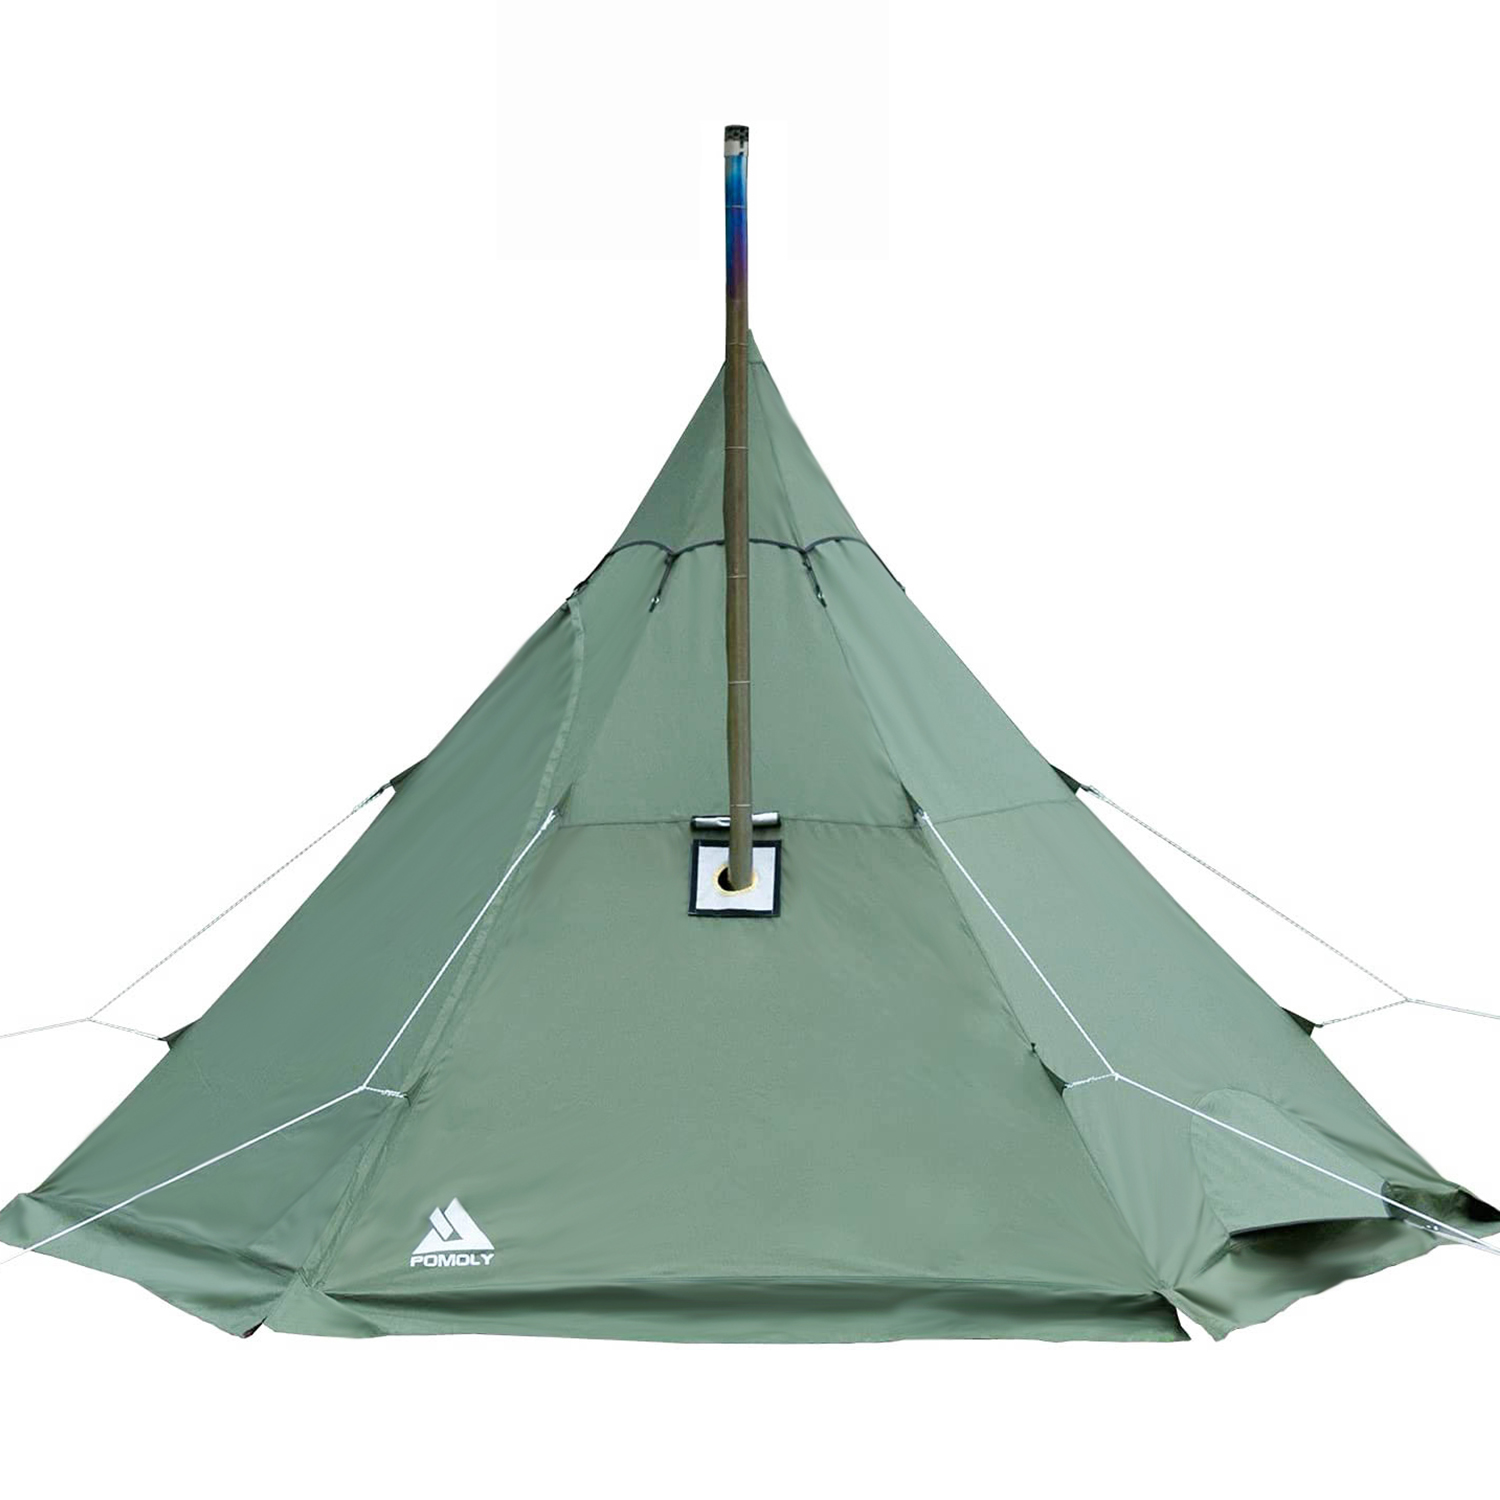 AIDS Tegenwerken De databank POMOLY Hot Tent with Wood Stove Jack for Camping 3-5 persons